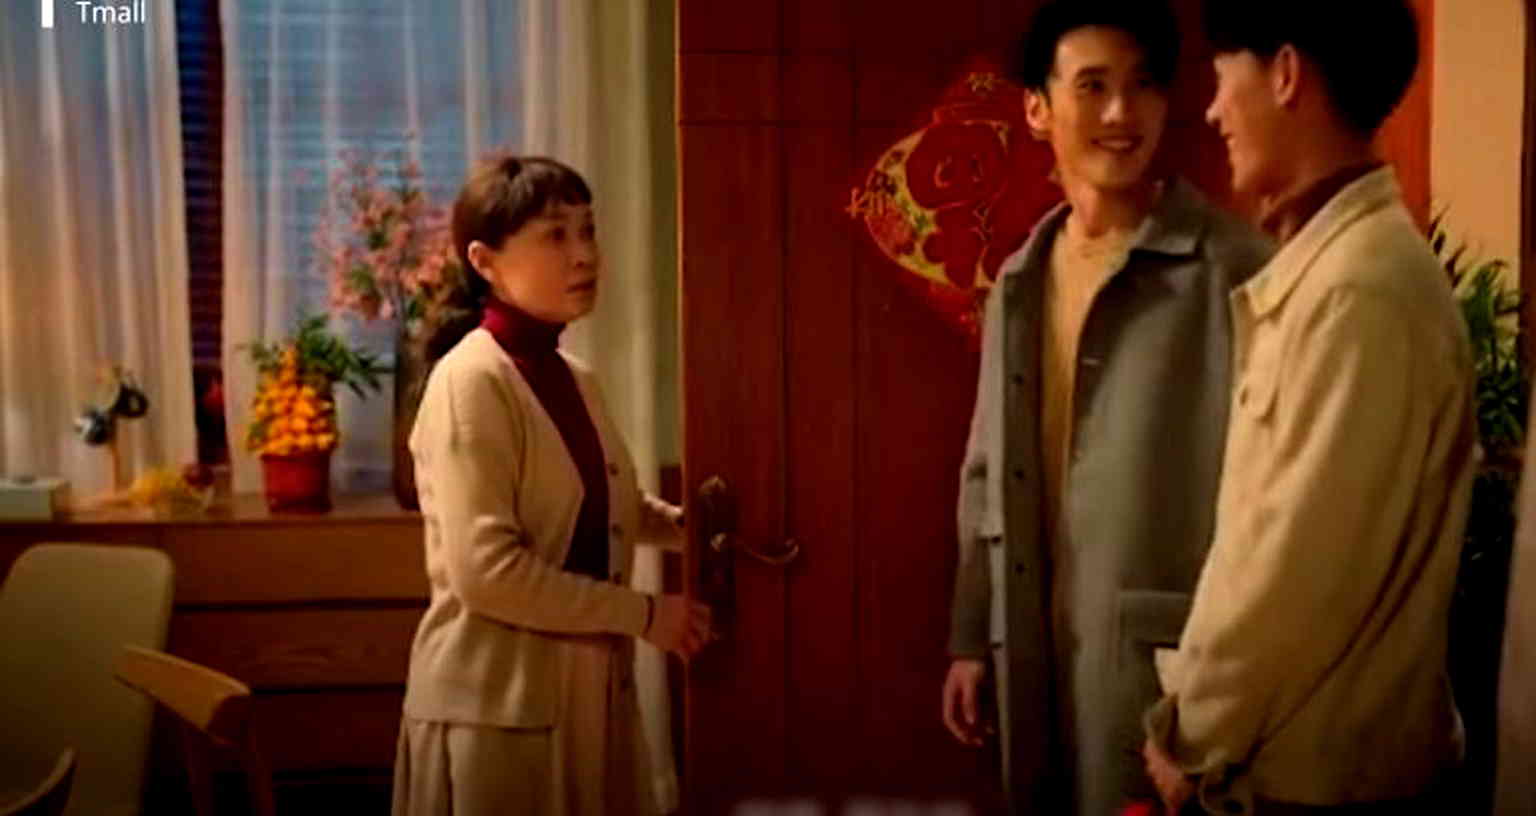 Alibaba Releases Chinese New Year Ad Featuring Gay Couple